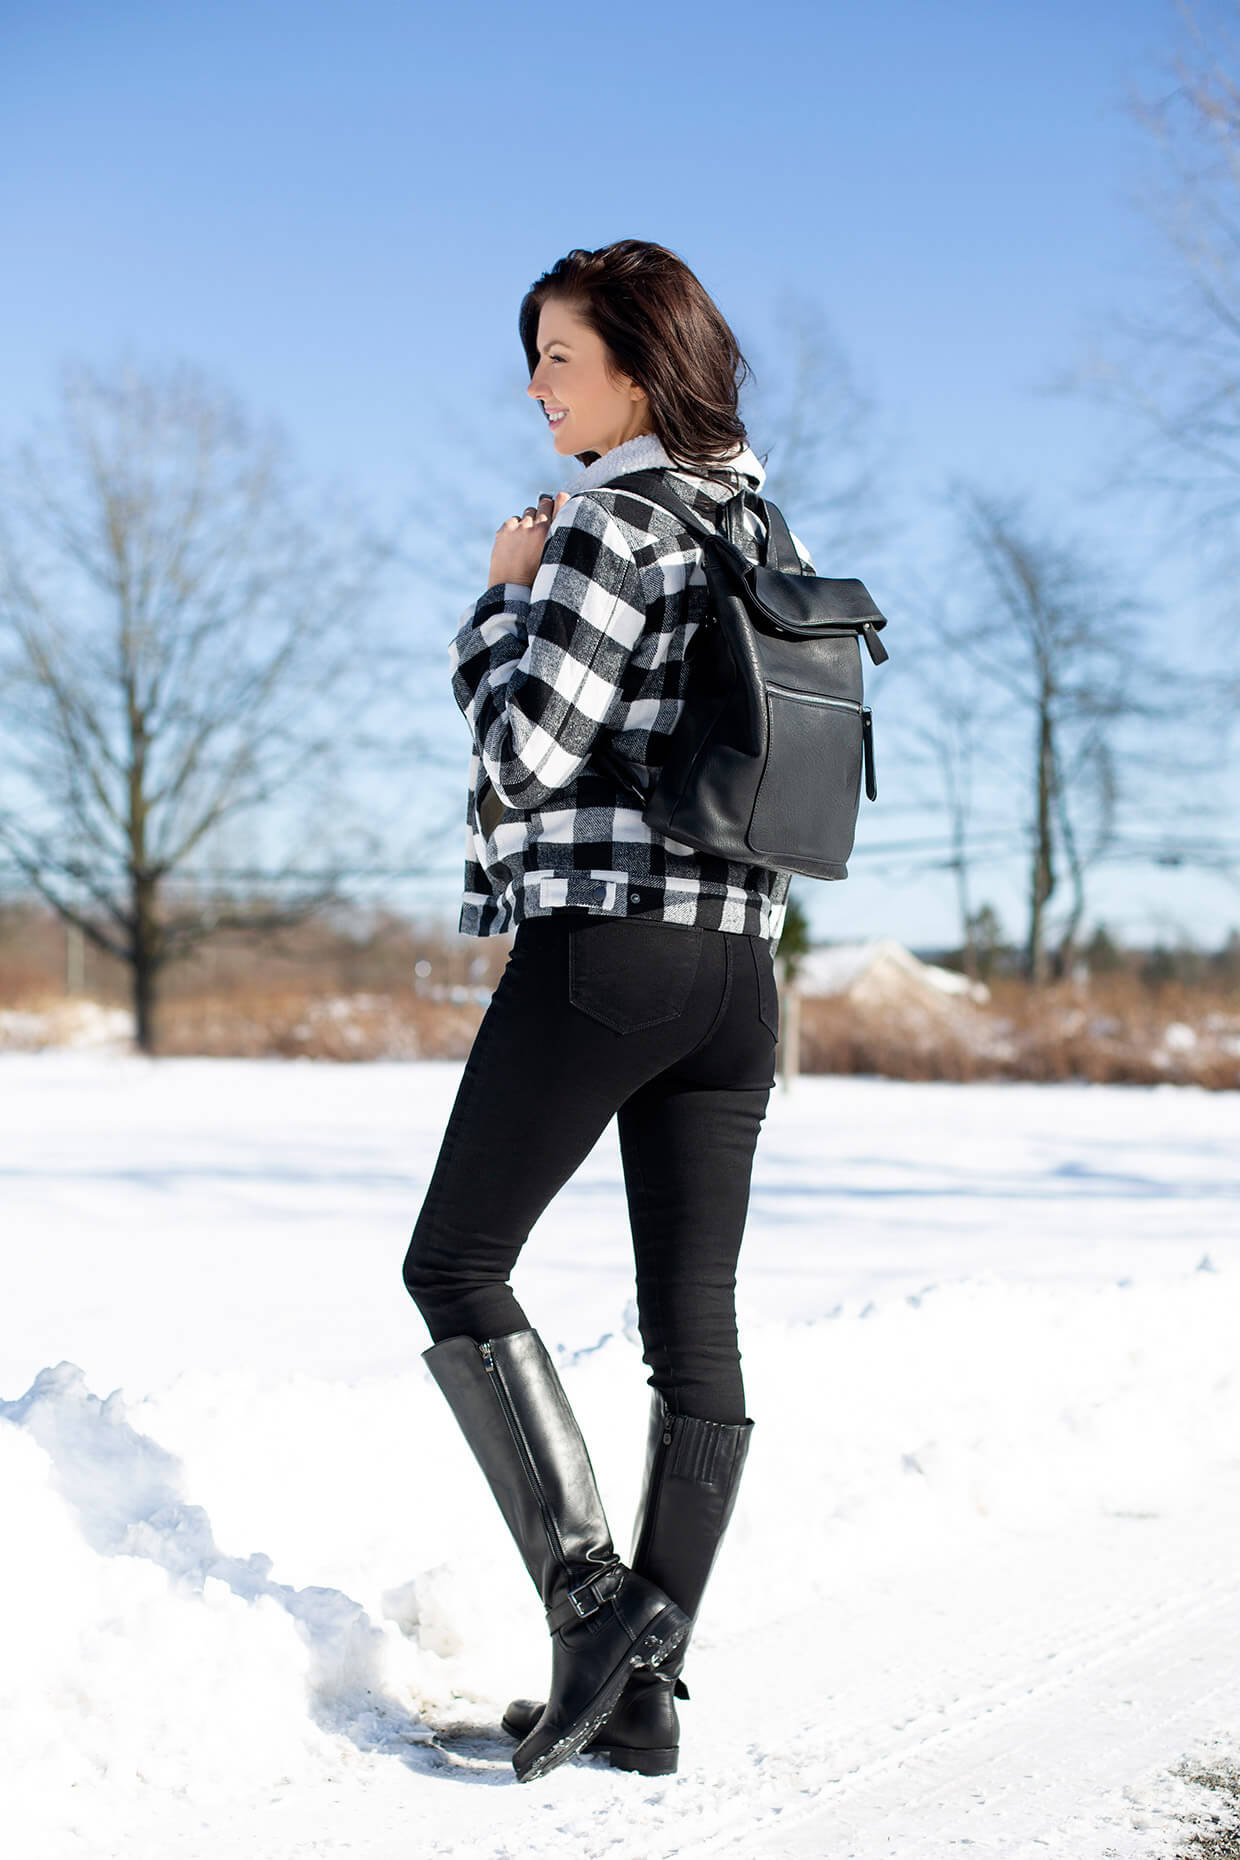 Silver Icing Flash Sale: Cute Ways to Style Winter Boots